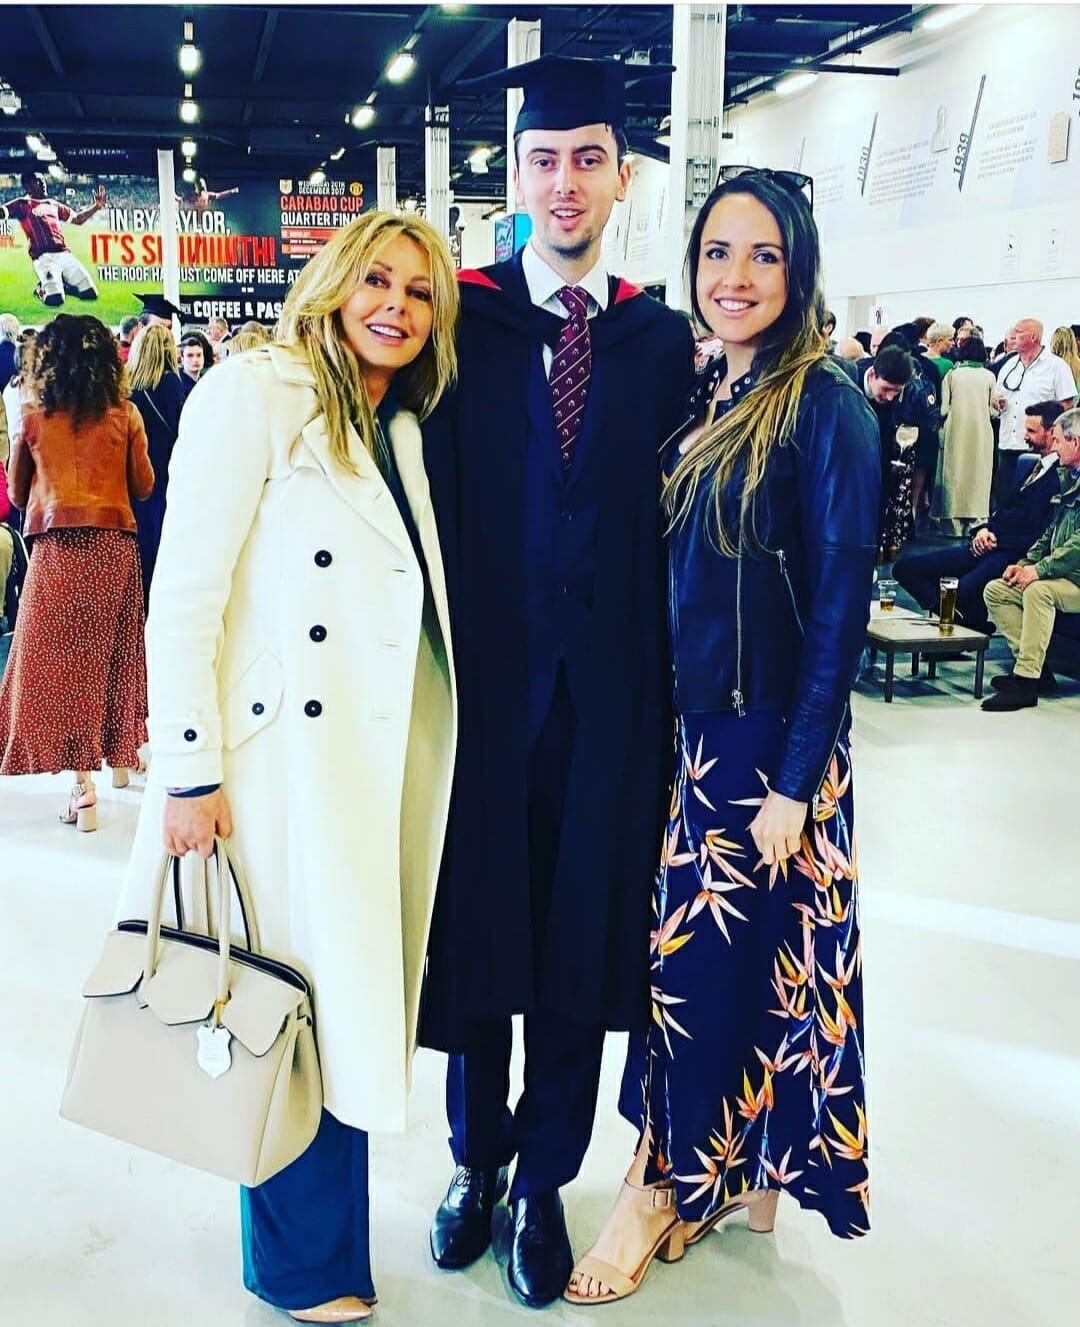 Carol Vorderman and her two kids, Katie King and Cameron King